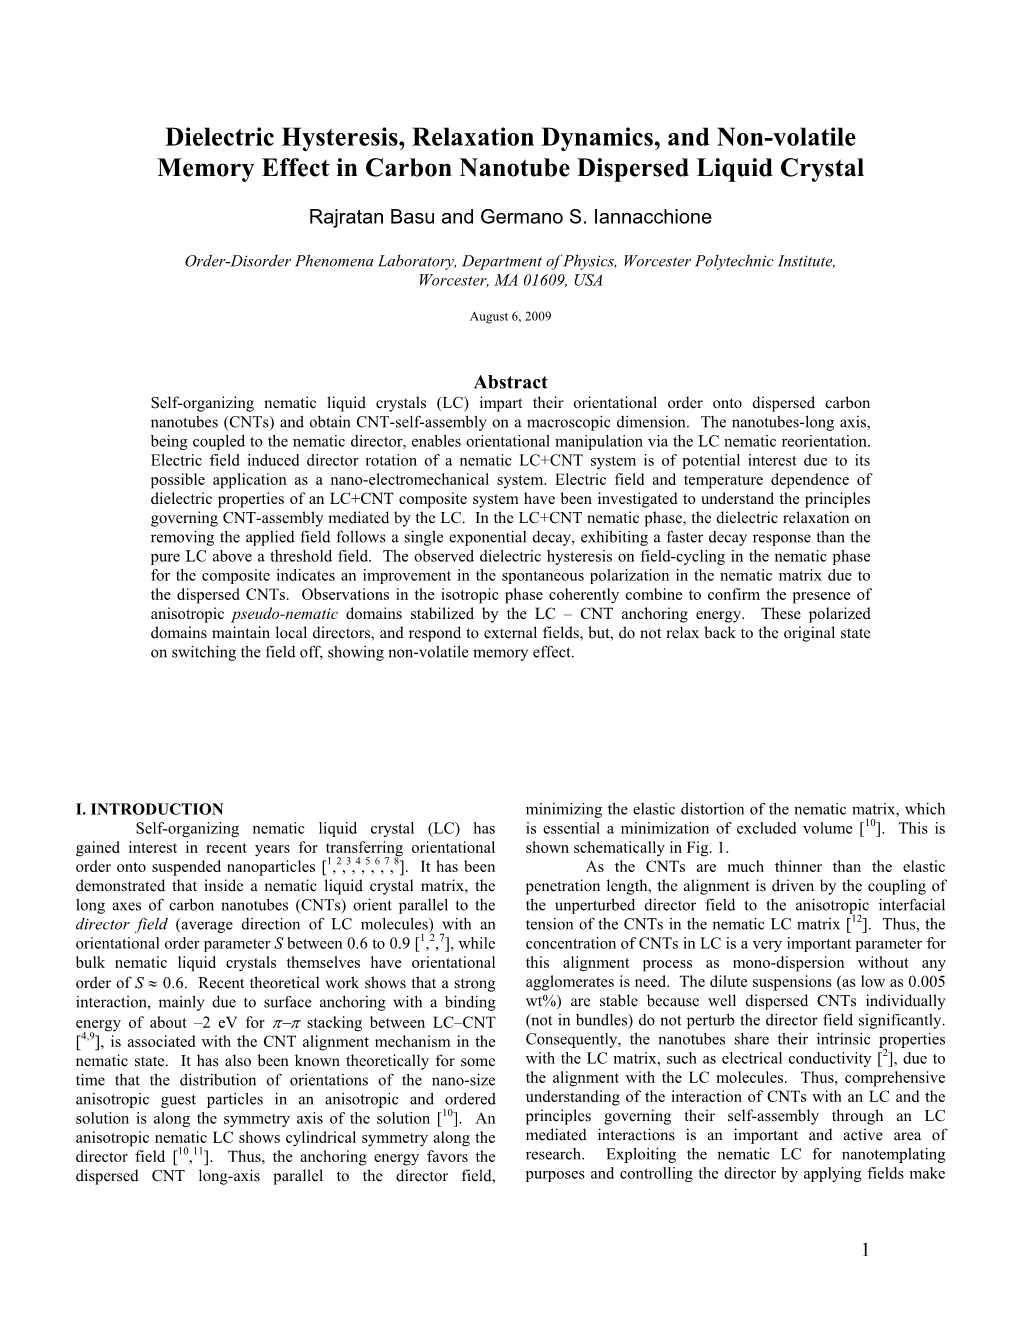 Dielectric Hysteresis, Relaxation Dynamics, and Non-Volatile Memory Effect in Carbon Nanotube Dispersed Liquid Crystal